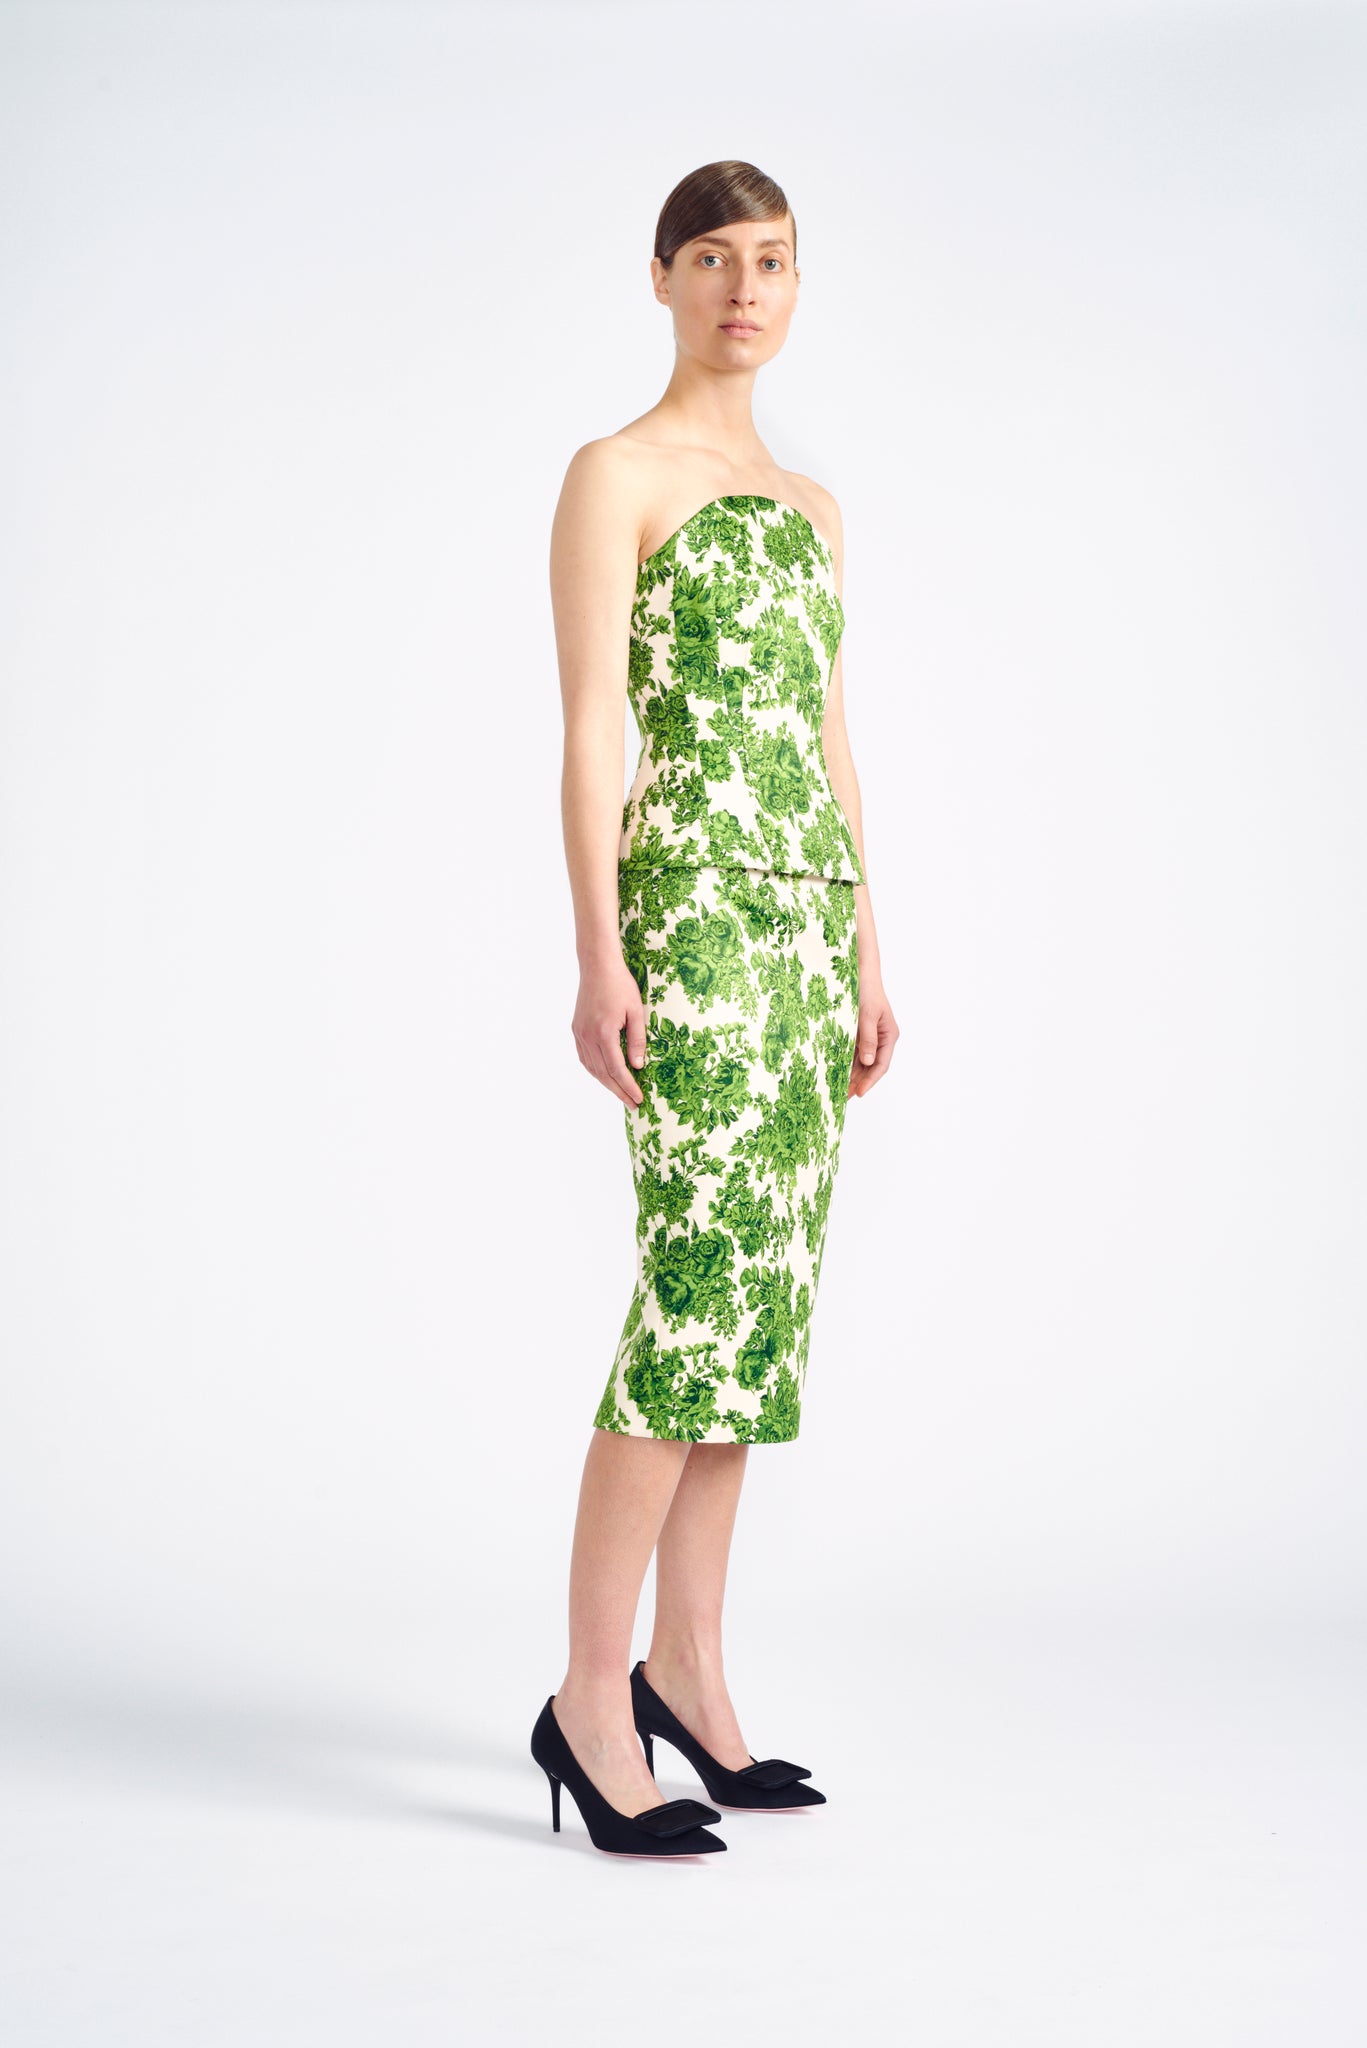 Gerty Top | Green Floral Printed Bustier | Emilia Wickstead